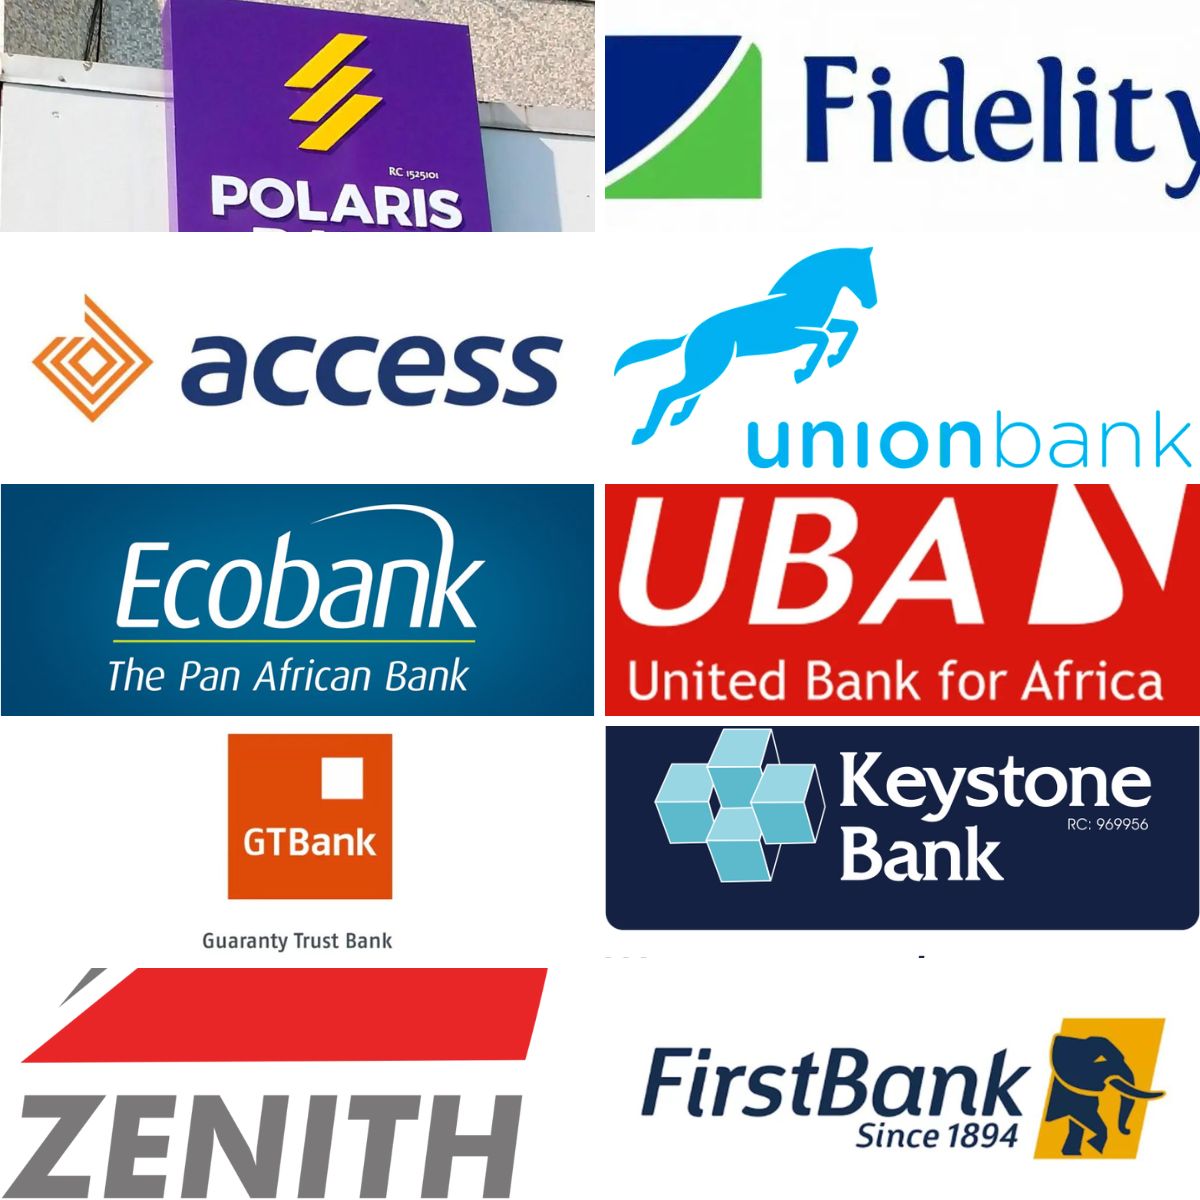 Top Nigerian Banks Based On Popularity, Yours Truly, Tips, November 29, 2023